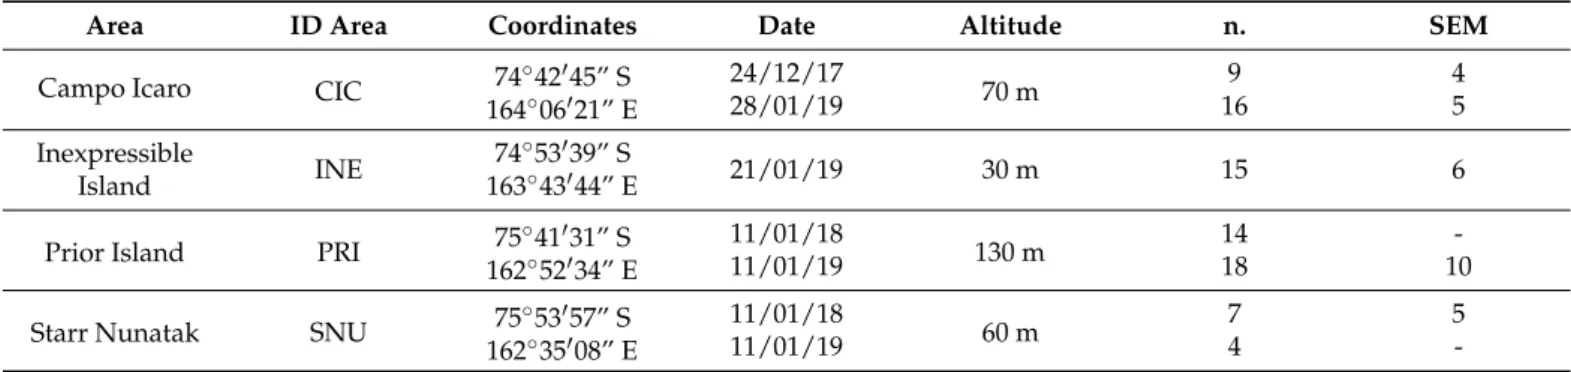 Table 1. Sampling location details including respective area codes and coordinates, the date of collection, the altitude of the sampling site and numbers of the specimens prepared for optical microscopy (n.) and scanning electron microscopy (SEM).